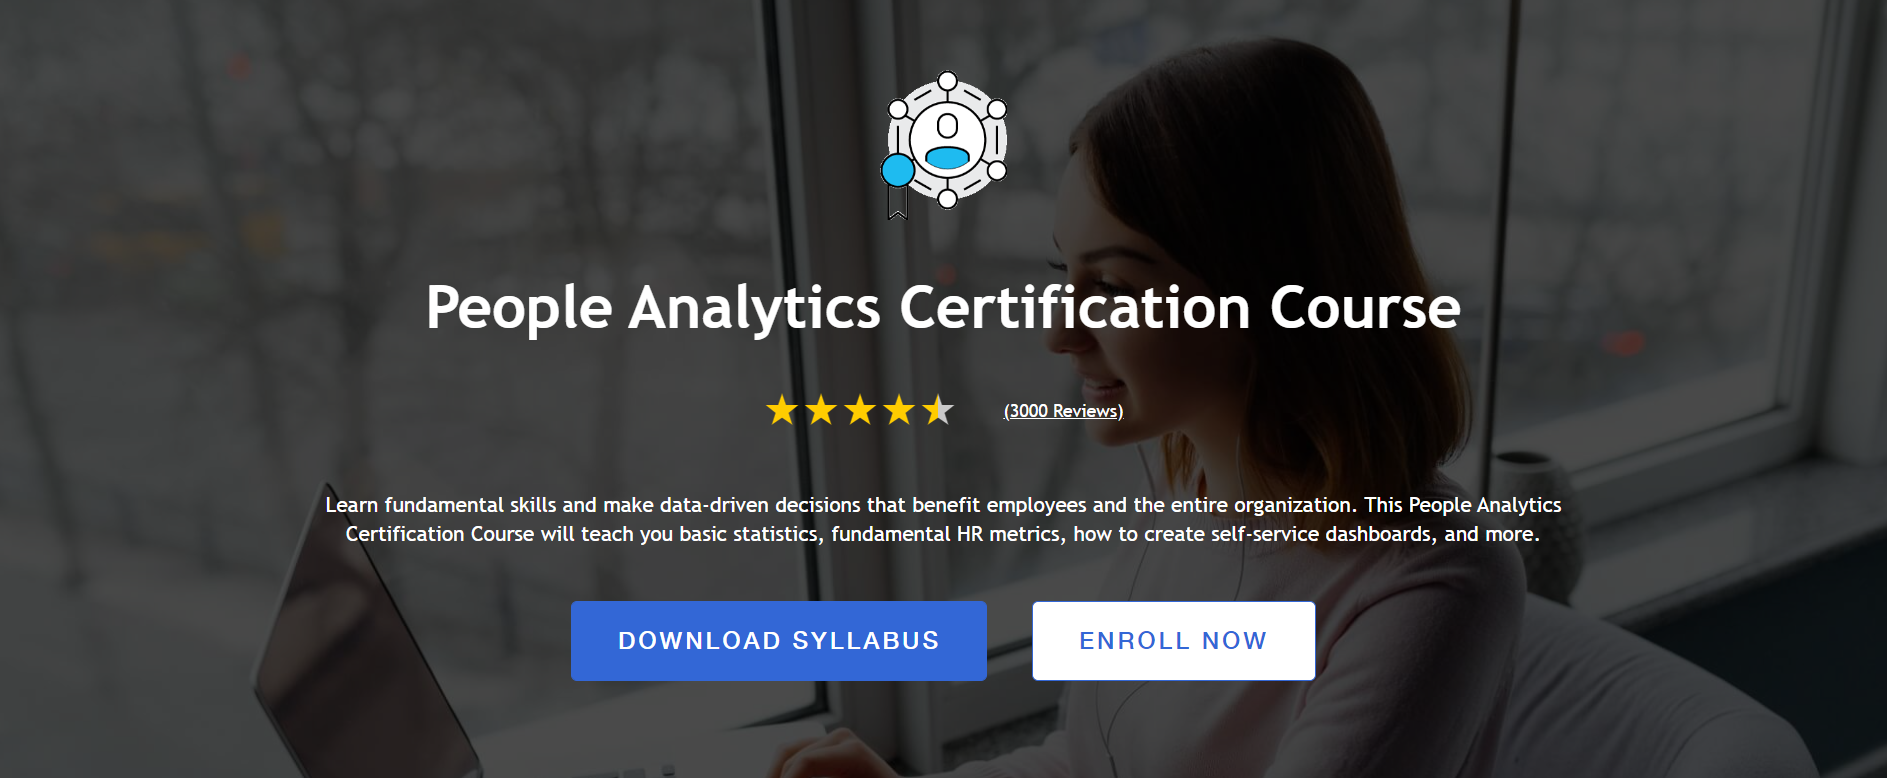 Best People Analytics Certification Course: Reviews and Pricing